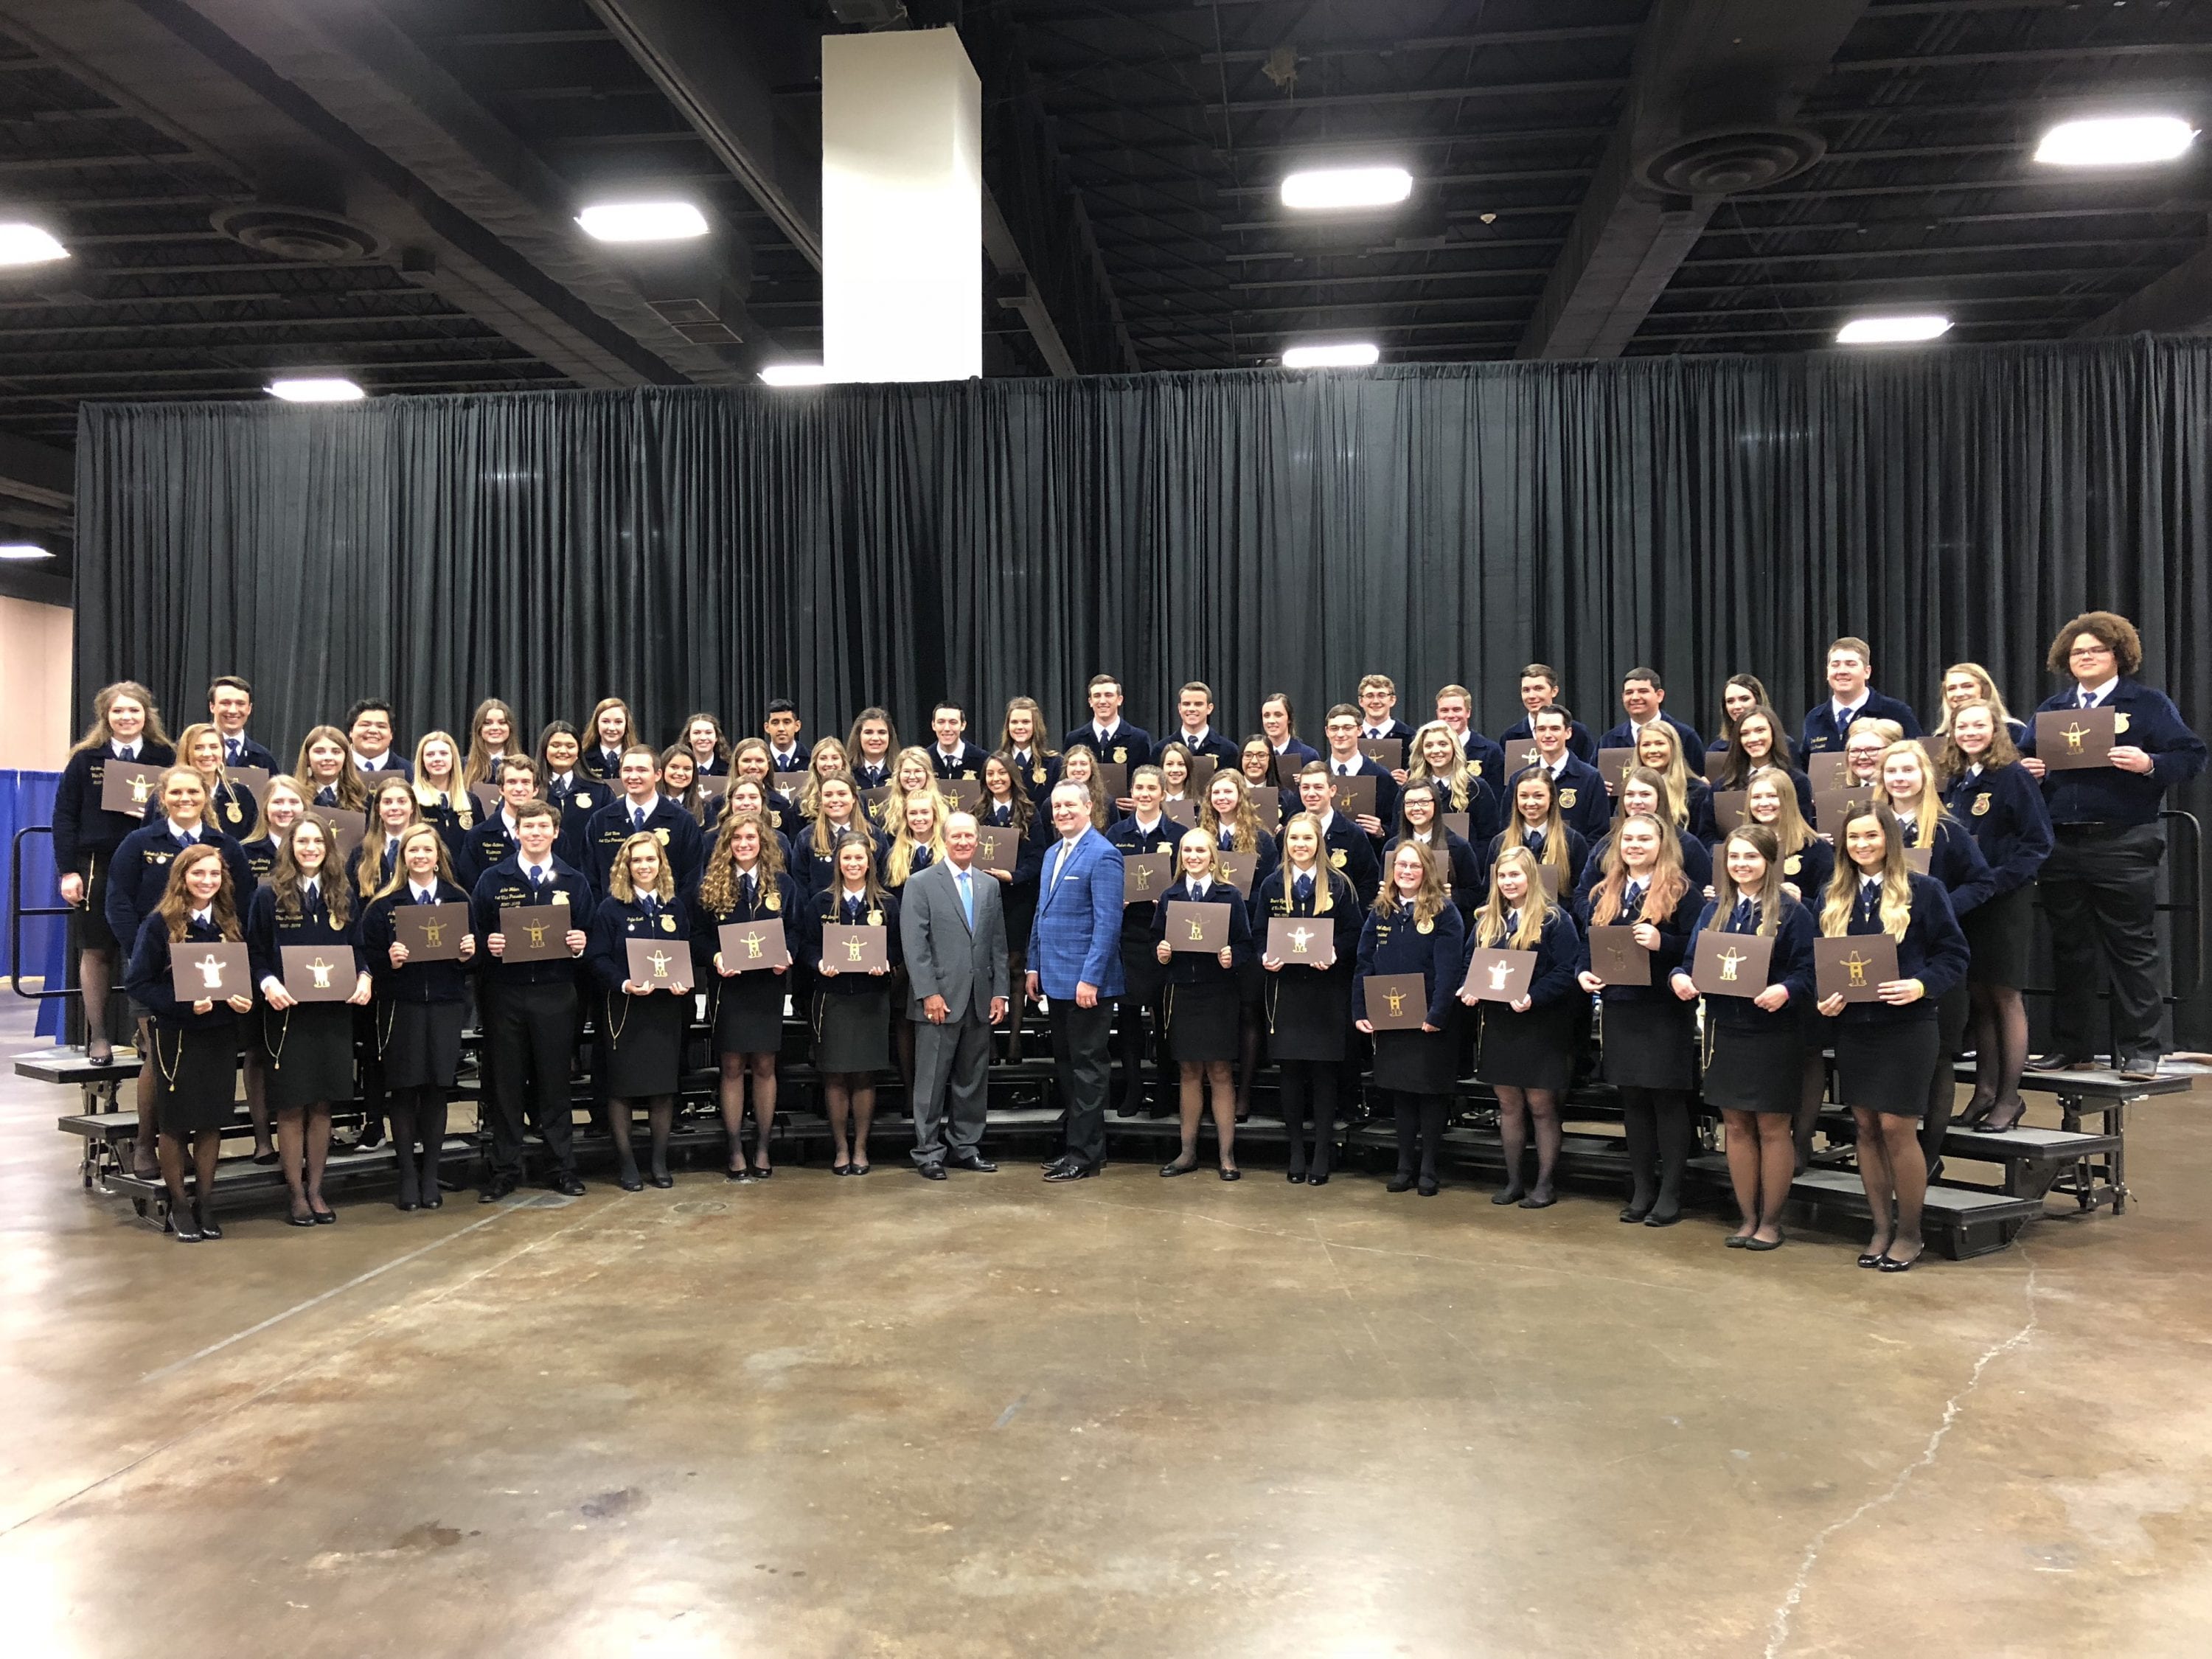 HOUSTON LIVESTOCK SHOW AND RODEO™ SCHOLARS PRESENTED WITH $1.4 MILLION IN SCHOLARSHIPS DURING ANNUAL TEXAS FFA STATE CONVENTION